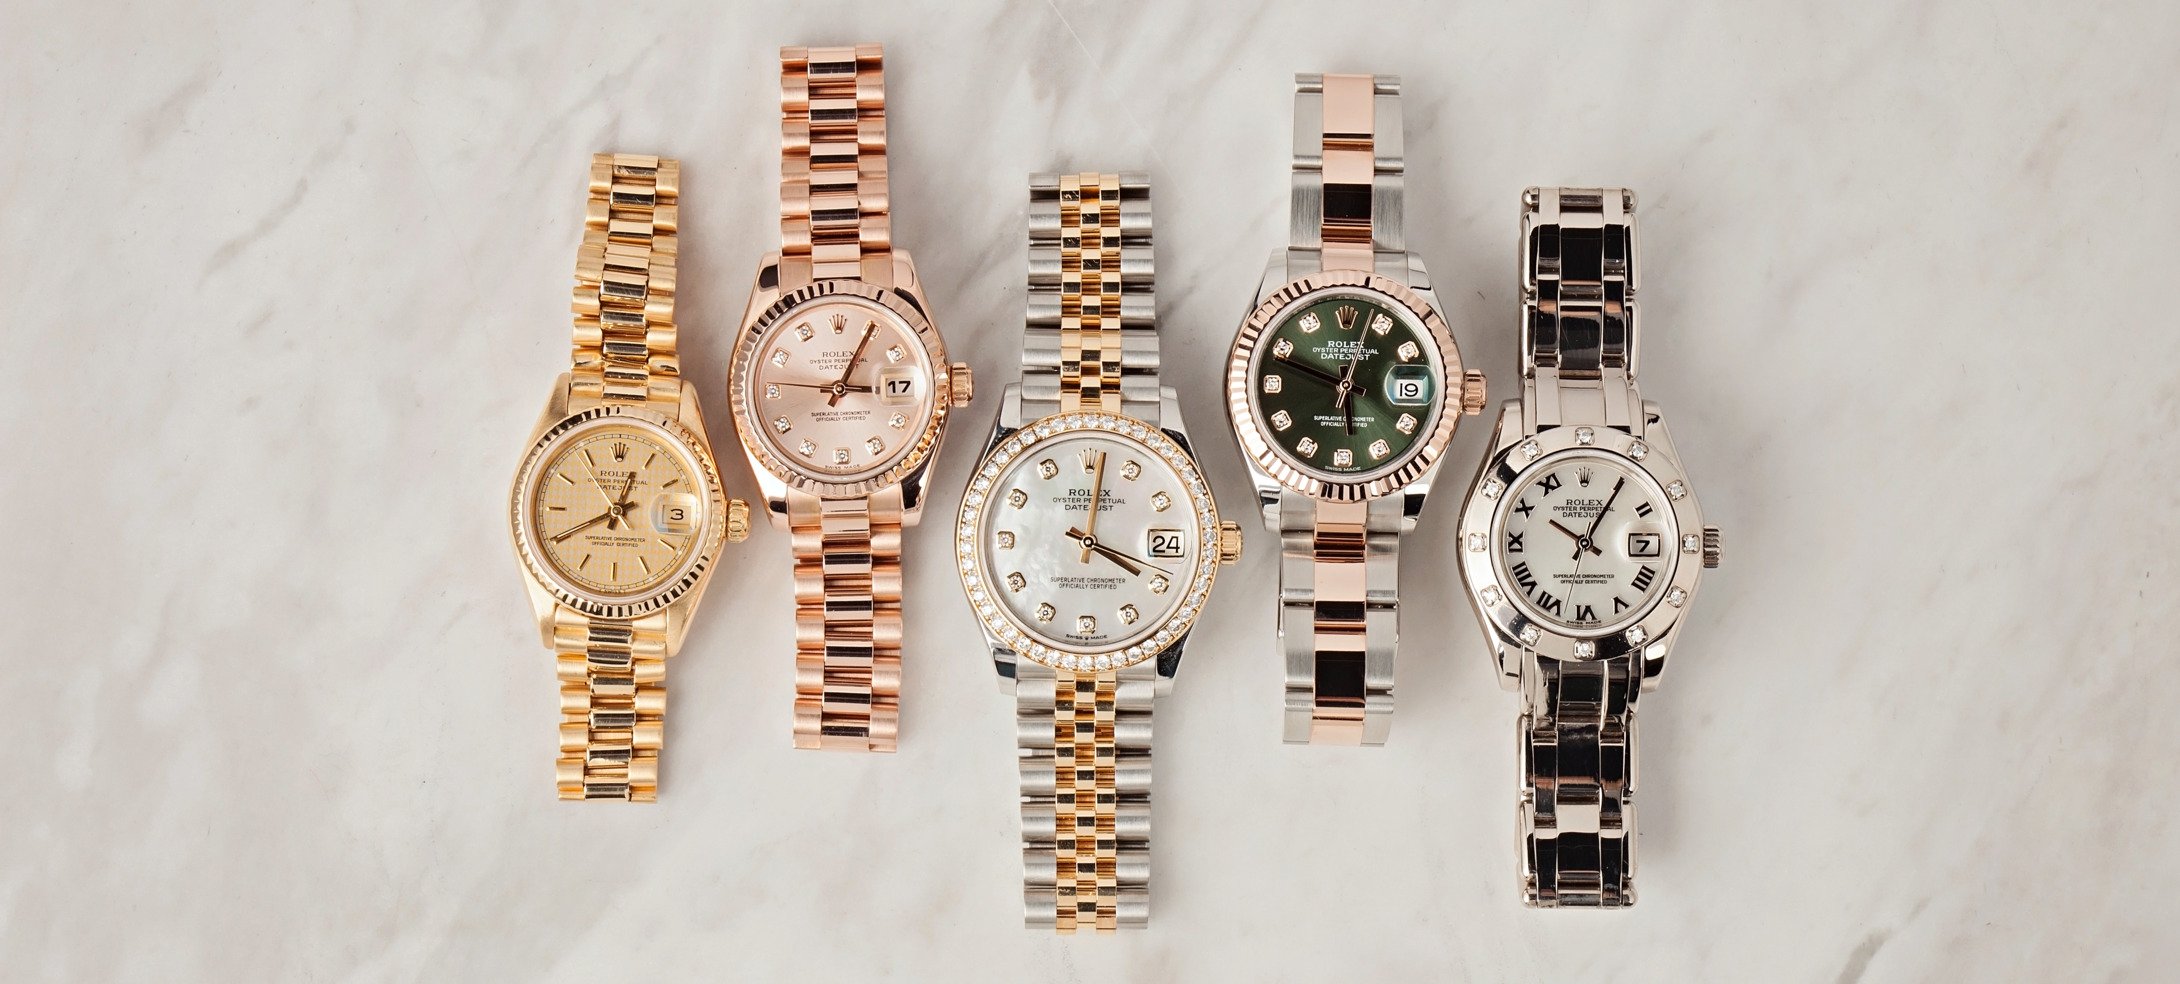 Luxury Watch Brands Like Rolex: The Official Buying Guide - Bob's Watches